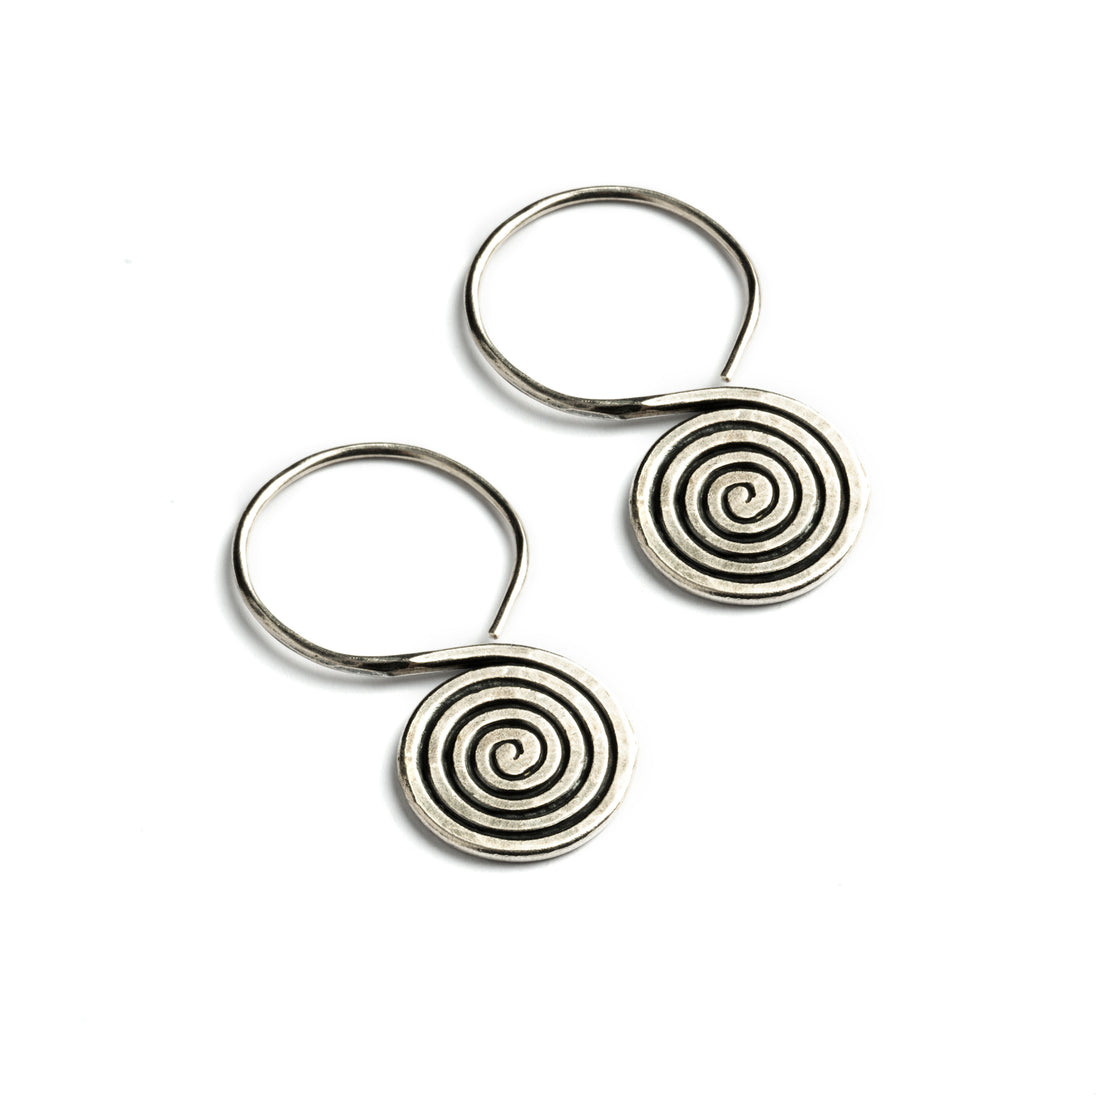 Spiral Engraved Tribal Silver Earrings right side view